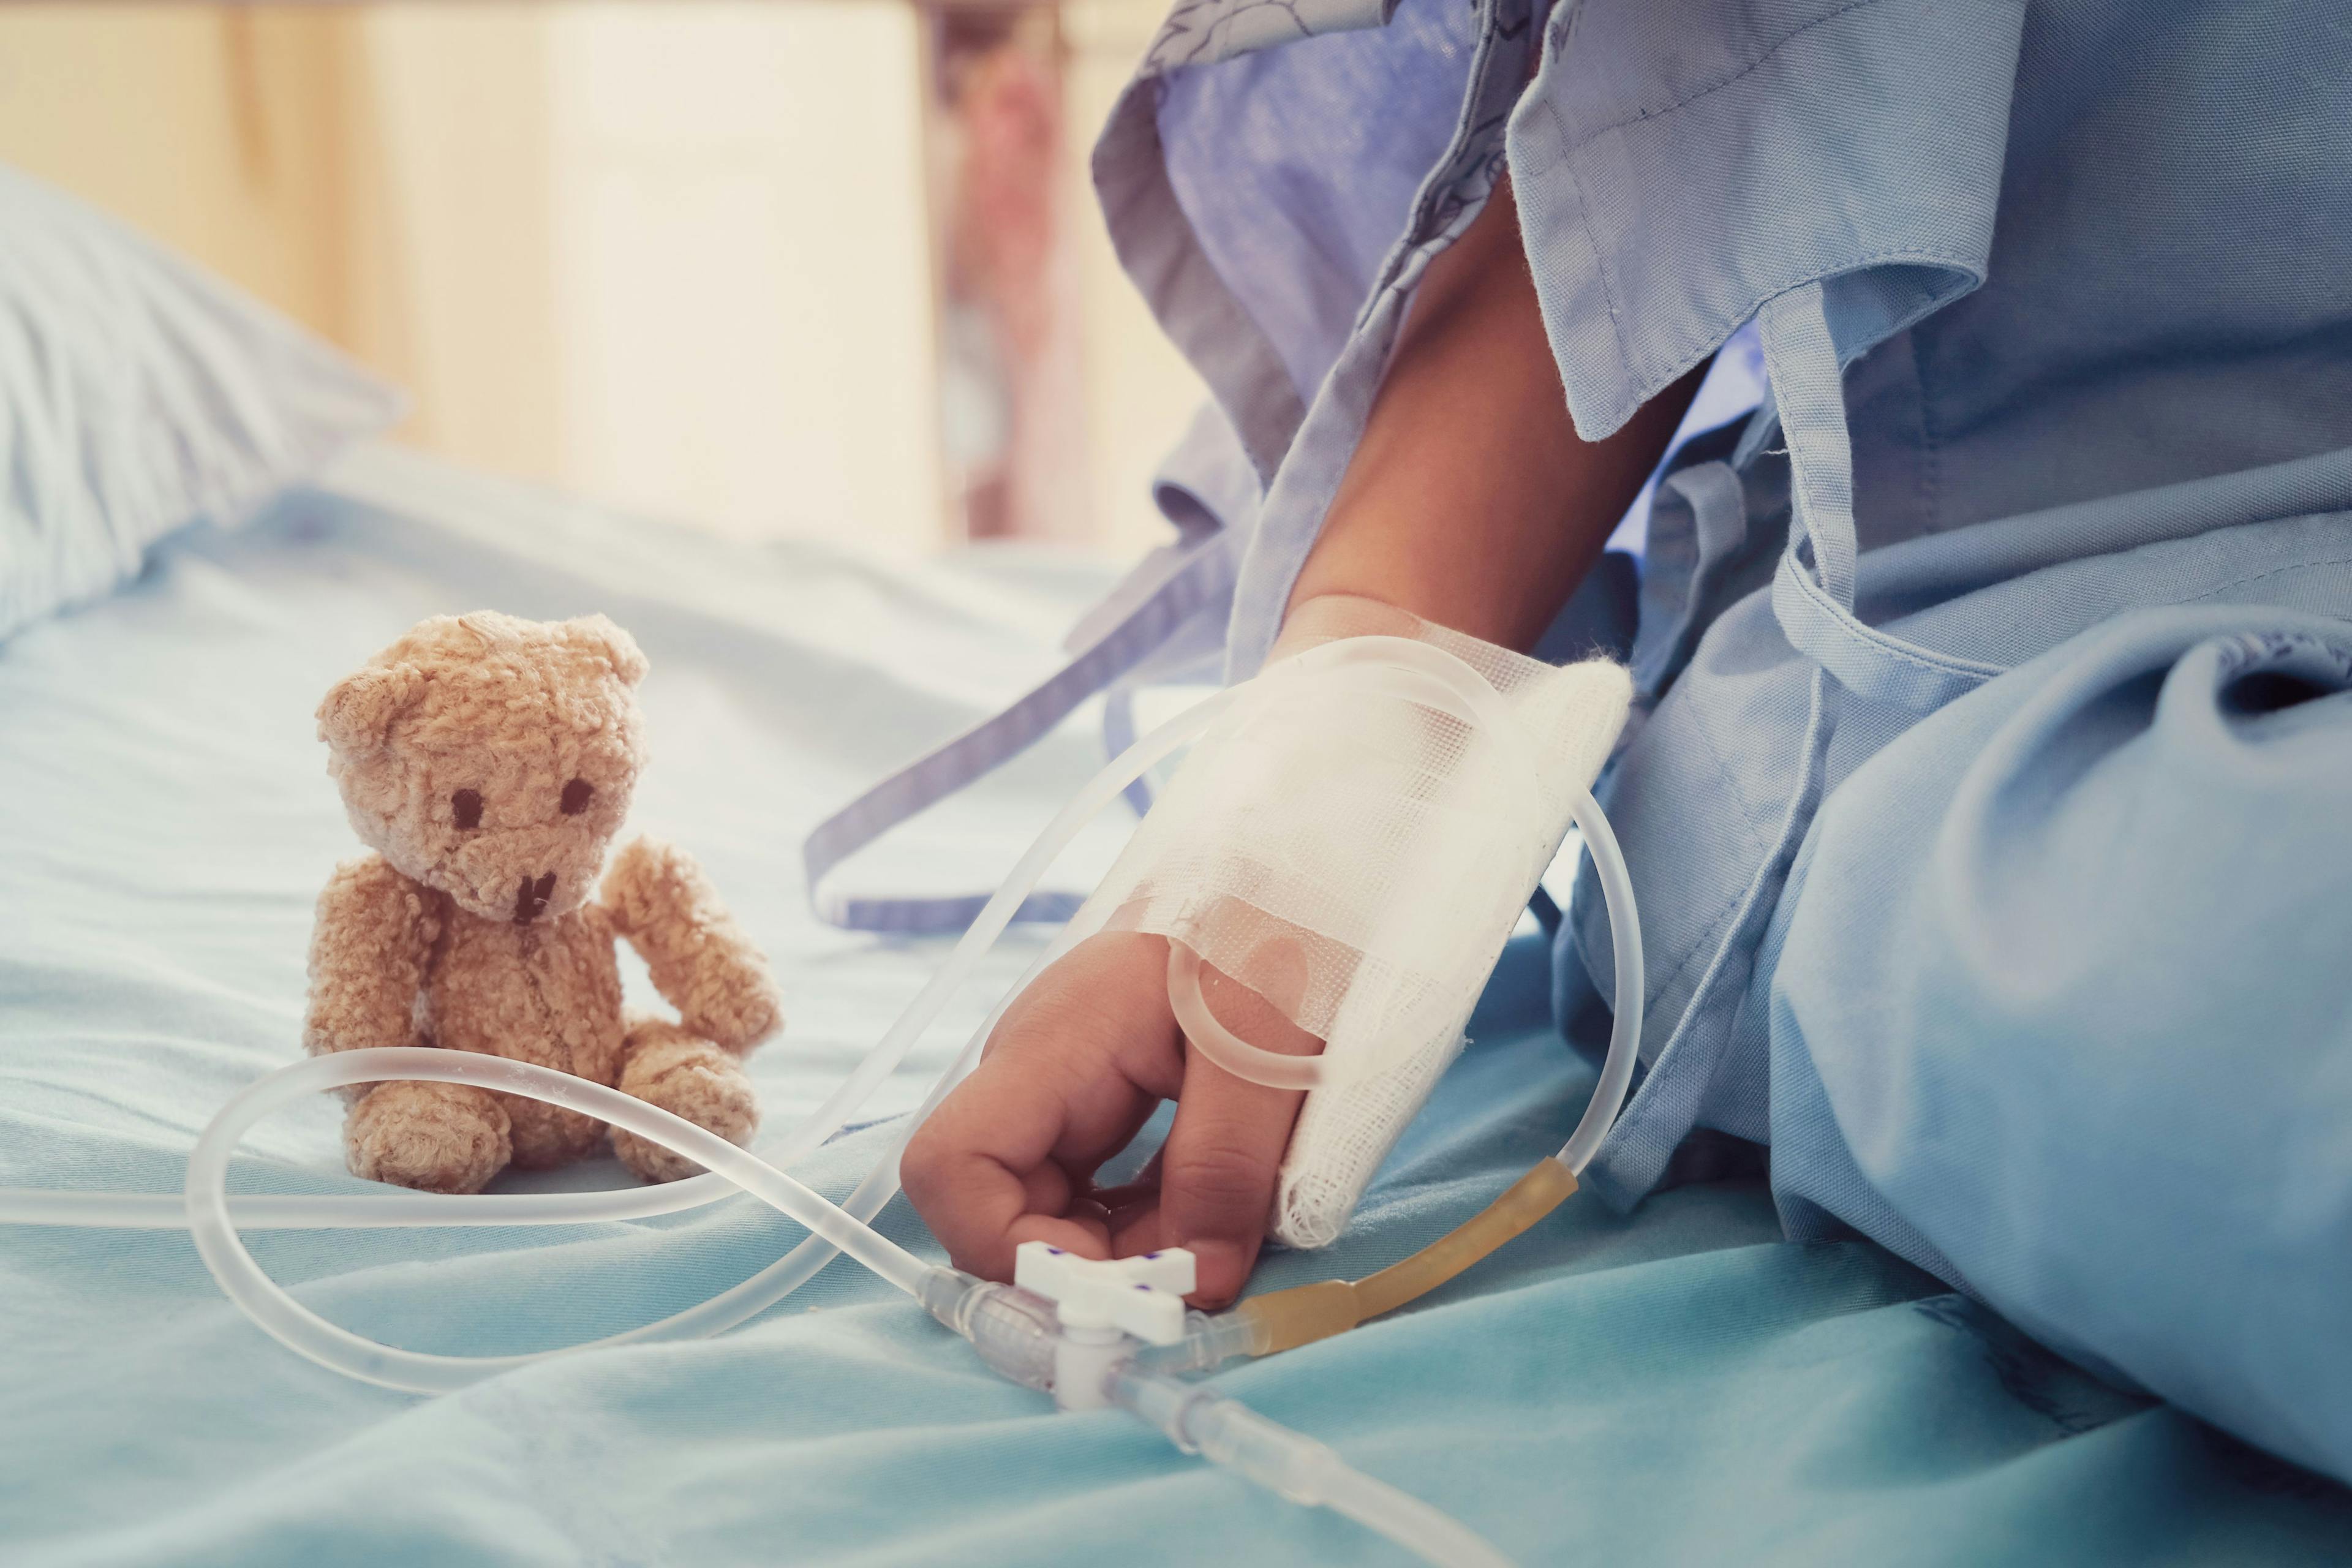 Pediatric patient in the emergency department (ED) | Image credit: Nutthavee - stock.adobe.com